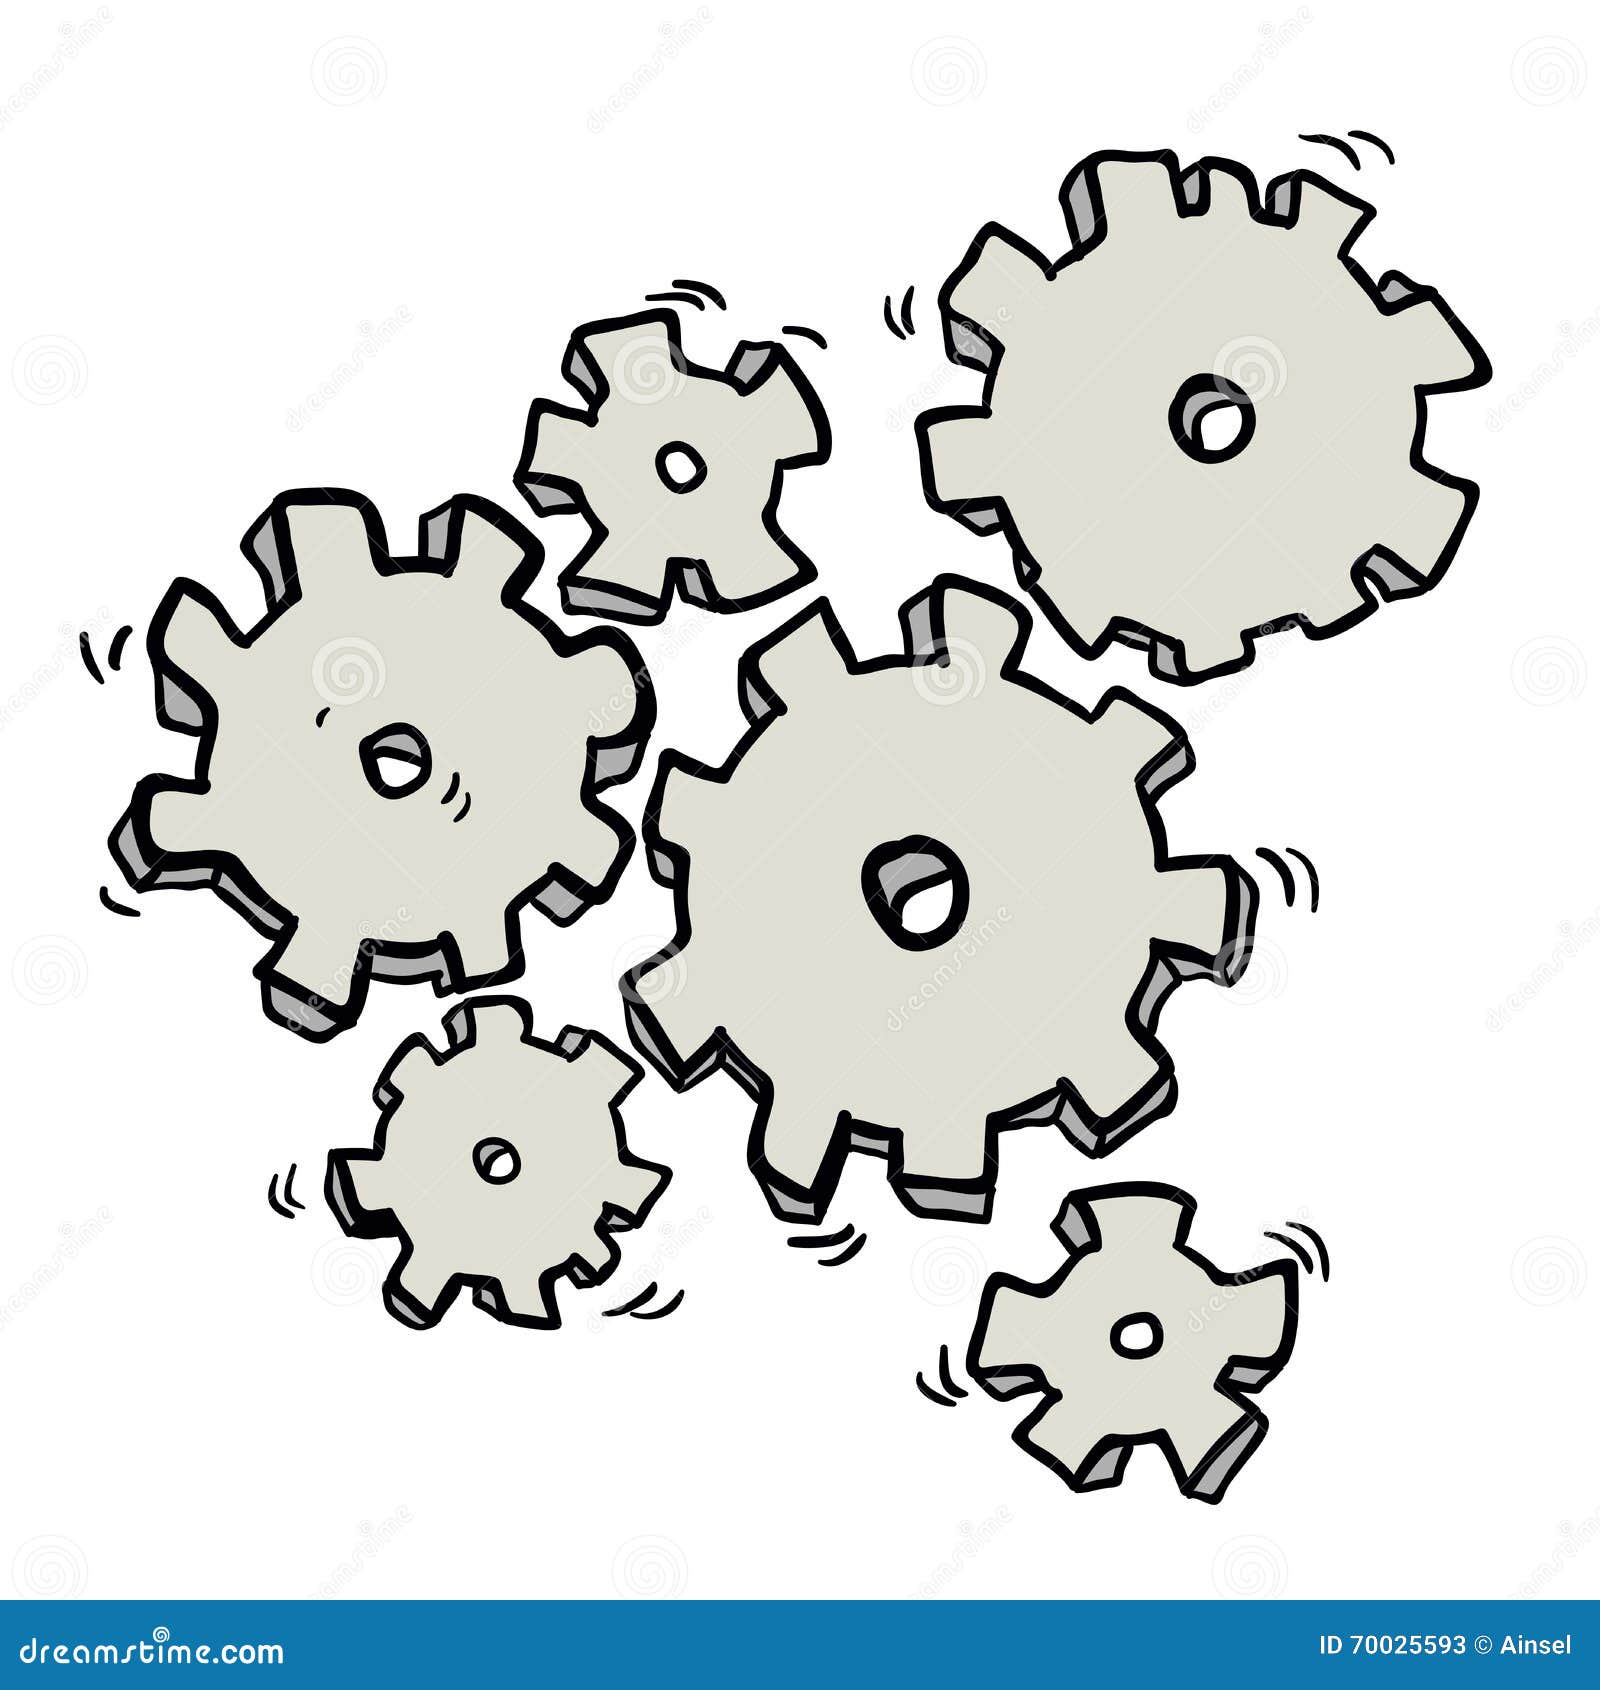 Cartoon cogs and gears stock vector. Illustration of drawn - 70025593